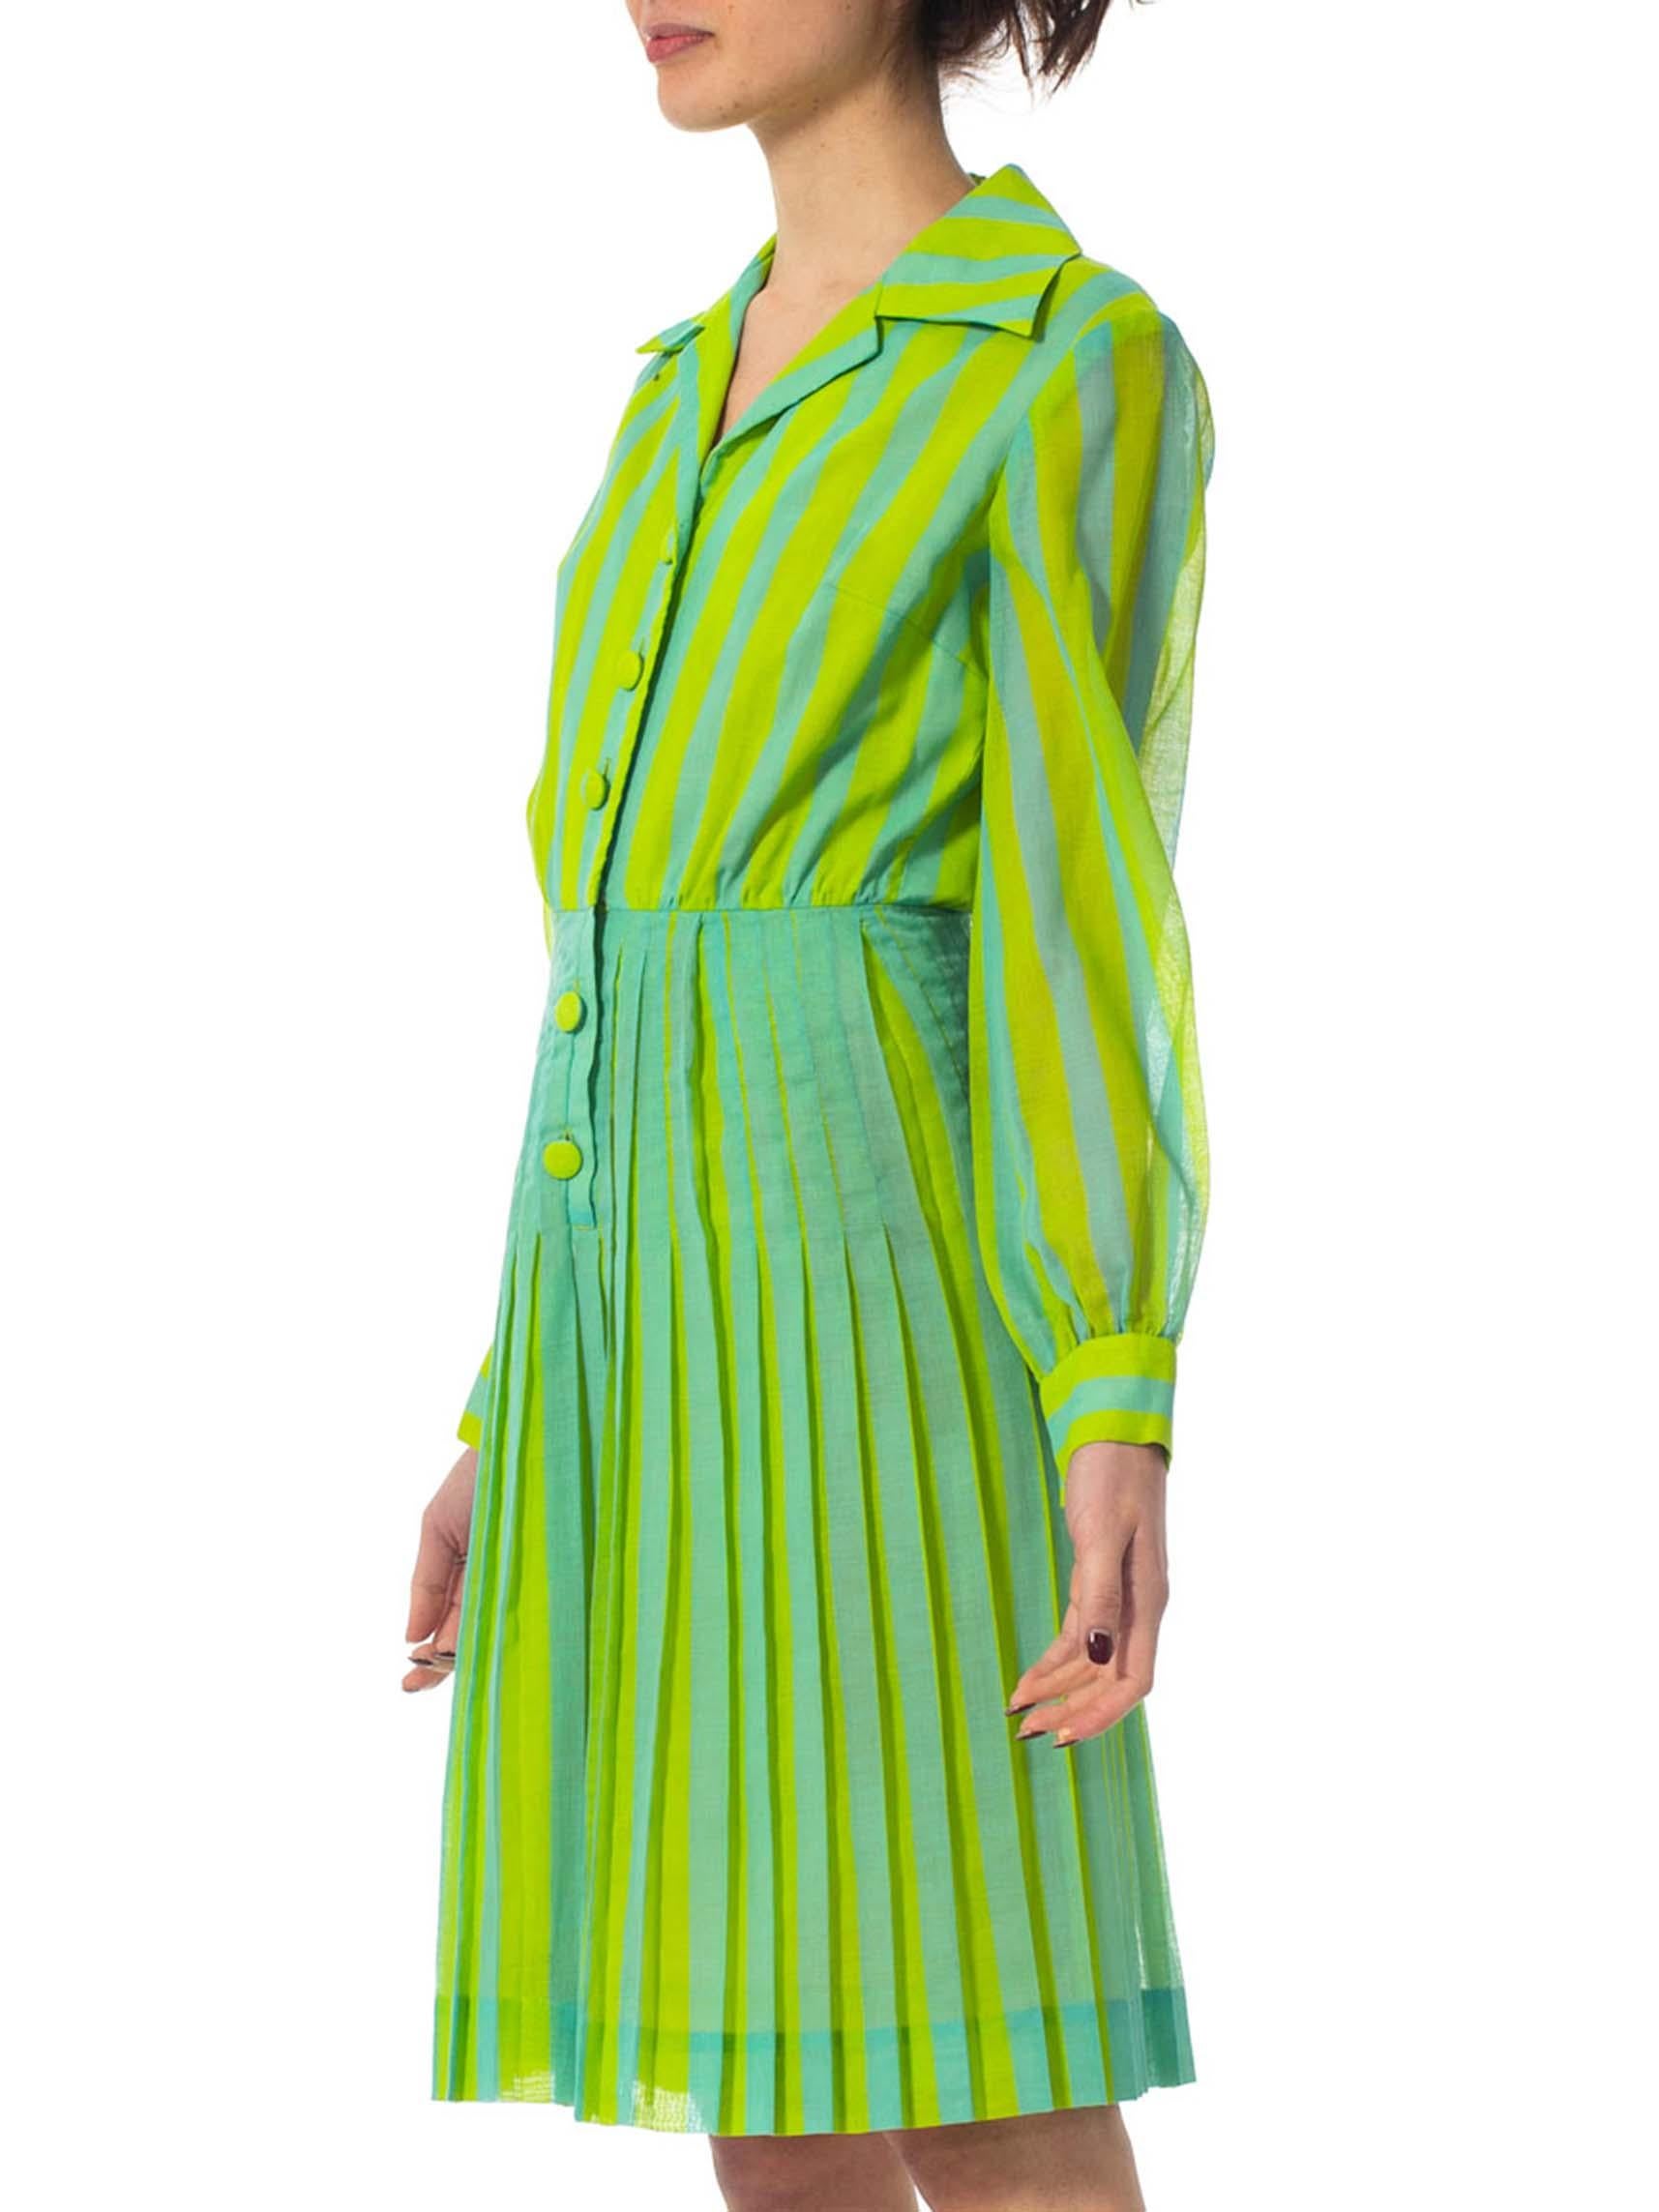 1970S DADDY DRADDY's Lime Green & Blue Cotton Striped Pleated Mod Dress For Sale 2